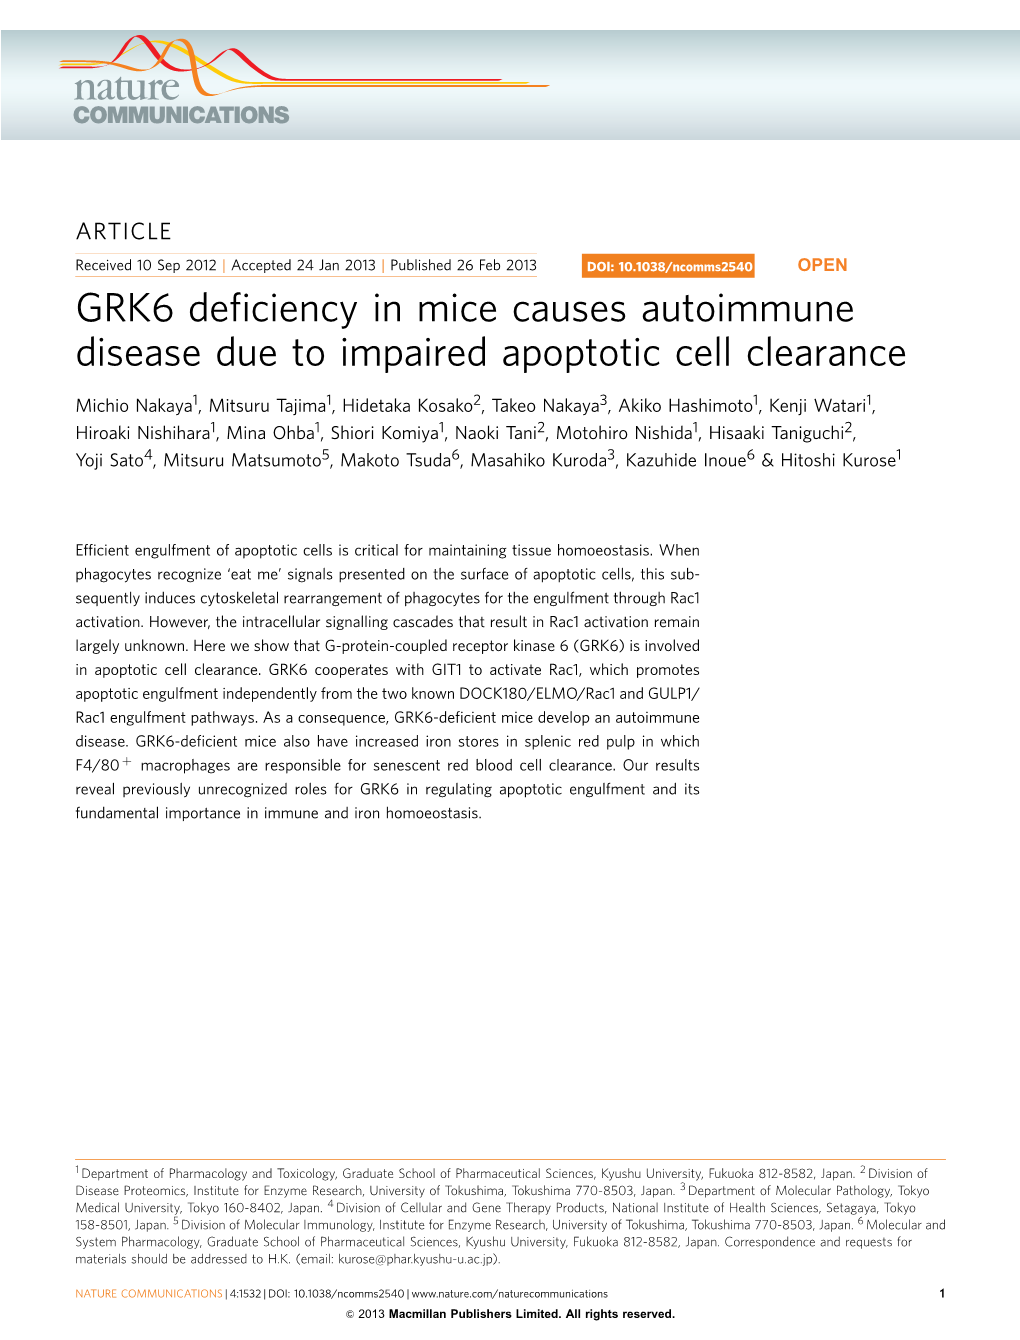 GRK6 Deficiency in Mice Causes Autoimmune Disease Due to Impaired Apoptotic Cell Clearance